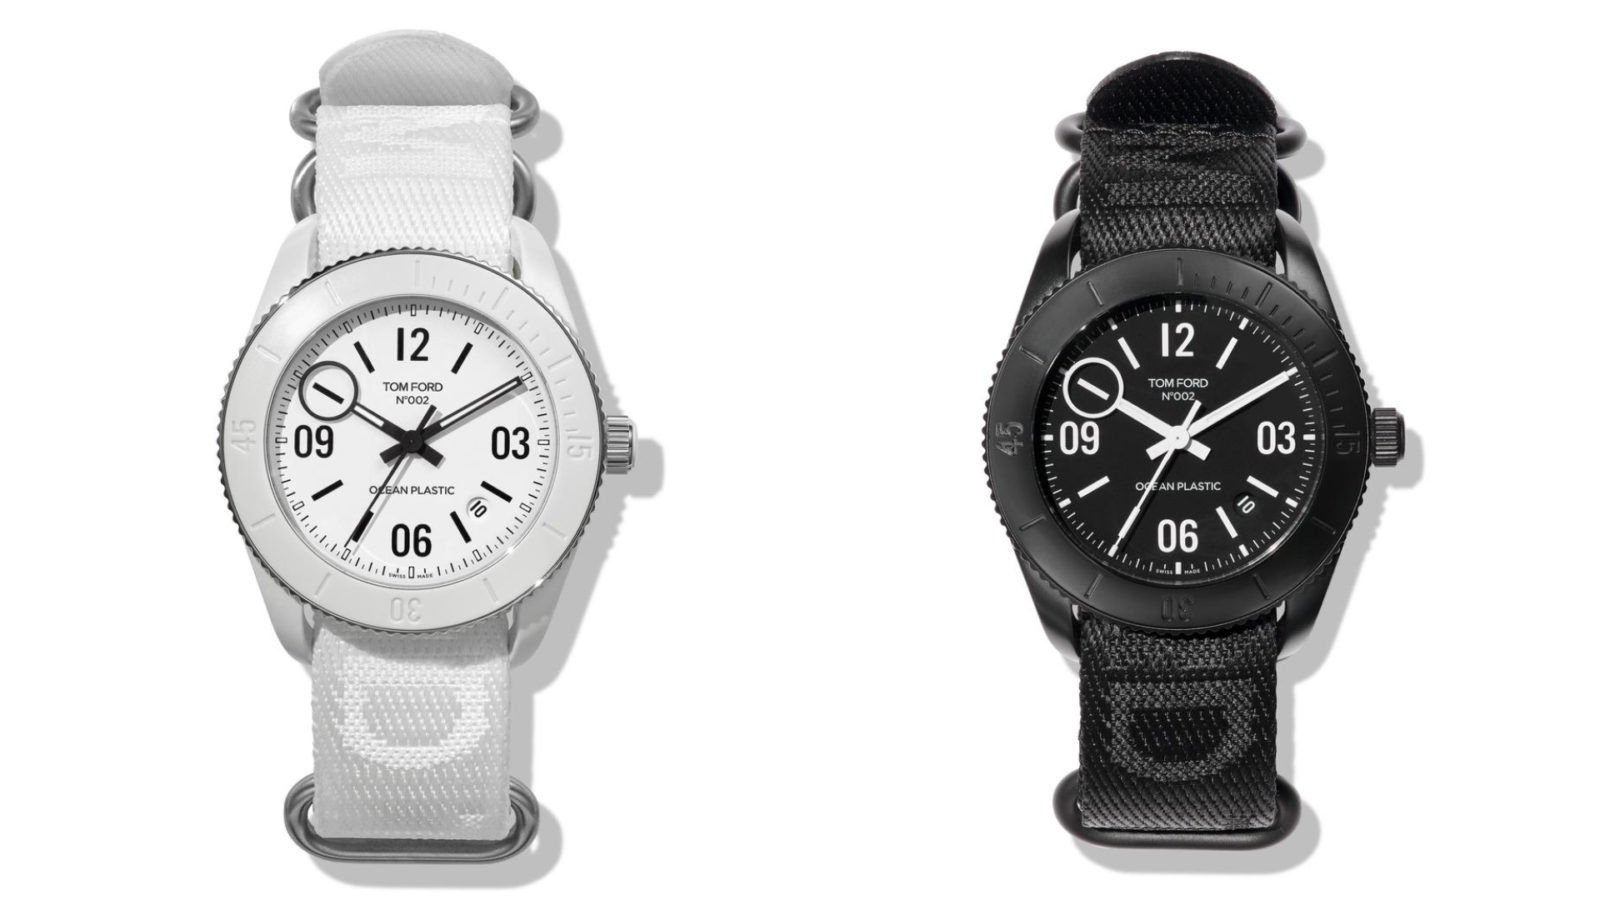 Tom Ford unveils the automatic Ocean Plastic Sport Watch made from recycled materials